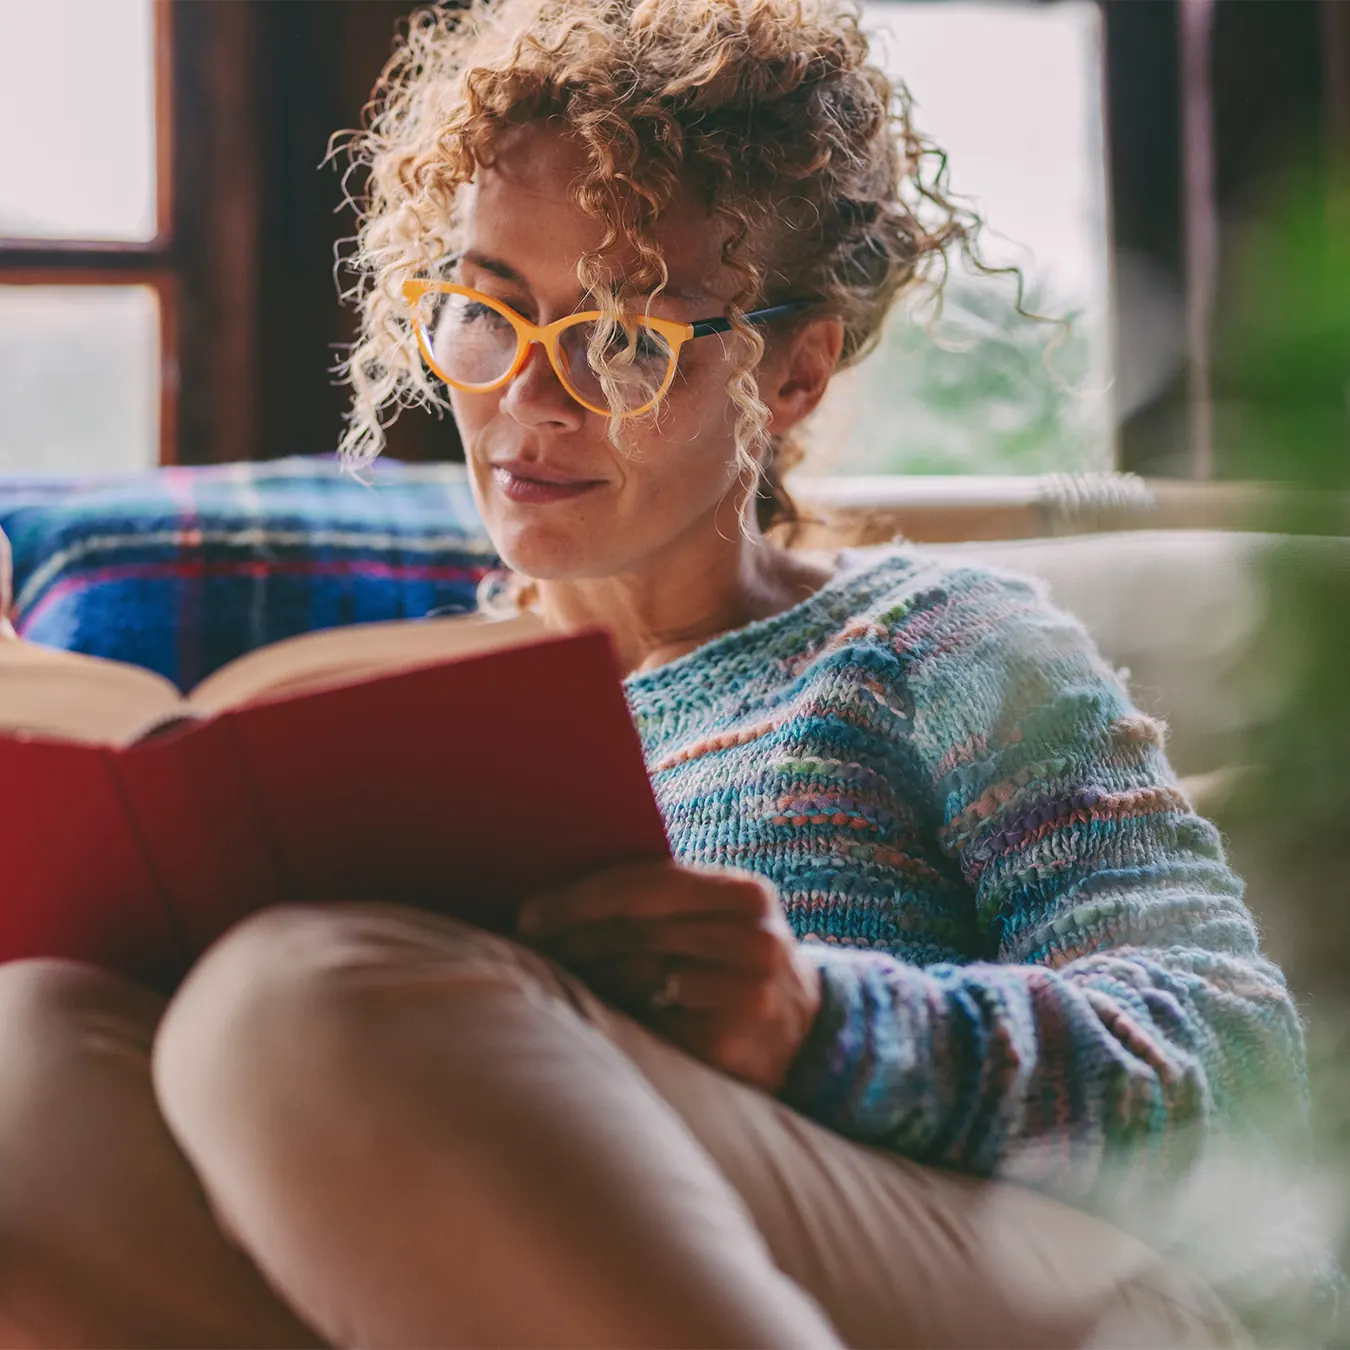 woman in her 40's wearing glasses and reading a book